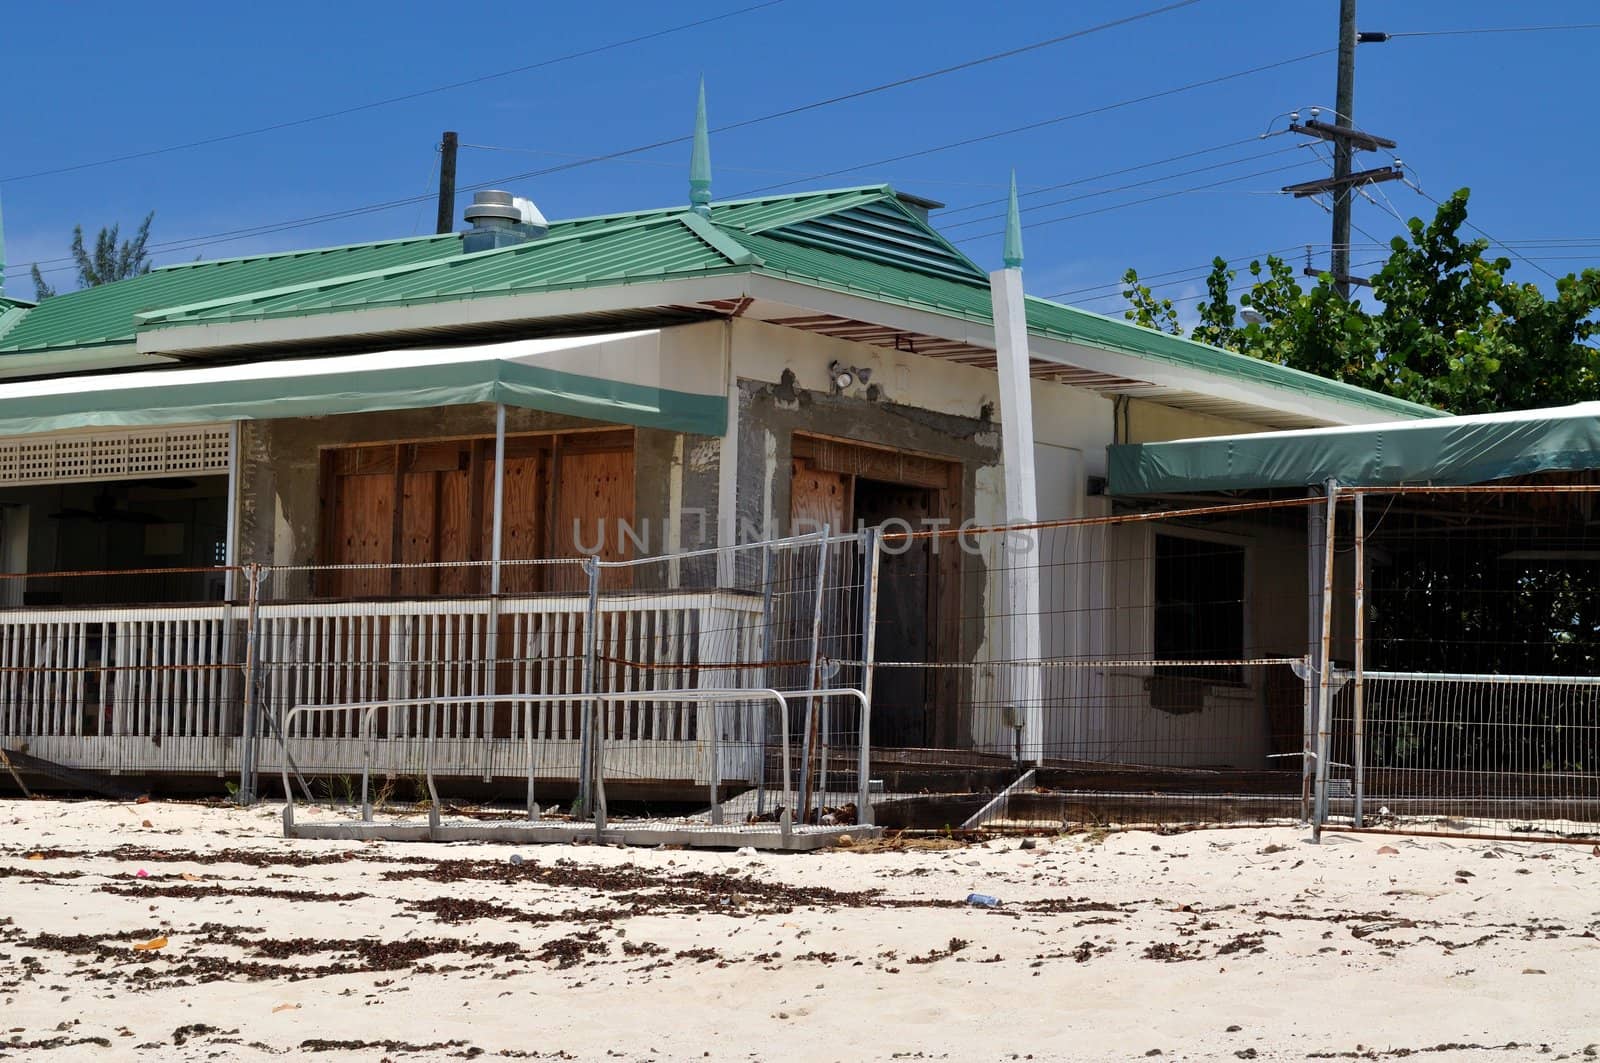 Old, abandoned beach house located on the Seven Mile Beach in Grand Cayman.